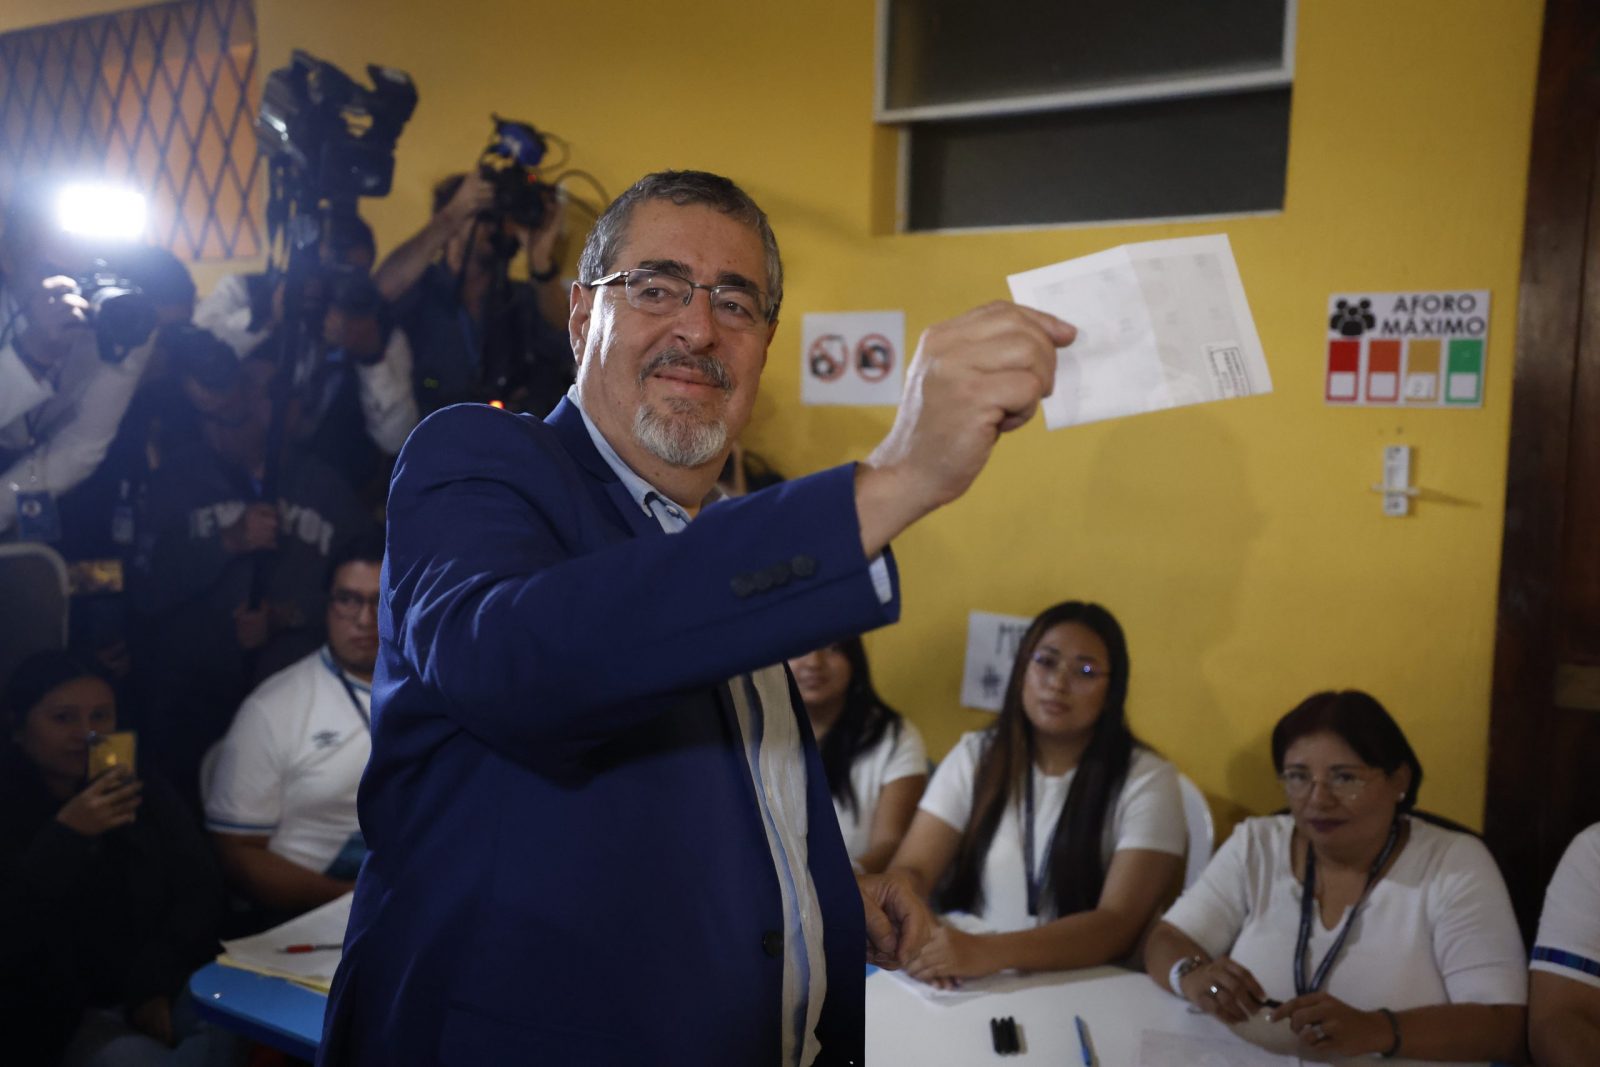 epa10810470 The progressive academic Bernardo Arevalo de Leon (C), of the Semilla Movement, votes during the second round of the presidential elections, in Guatemala City, Guatemala, 20 August 2023. The Guatemalan voting centers opened their doors this Sunday for election day, where the Central American country will decide its next president for the period 2024-2028. There are almost 3,500 voting centers where 9.3 million Guatemalans are registered to exercise their suffrage. The candidates running for the presidency are the winner of the first round held on 25 June, Sandra Torres Casanova, of the National Unity of Hope (UNE) and the second place, the progressive academic Bernardo Arevalo de Leon, of the Movimiento Semilla.  EPA/Esteban Biba